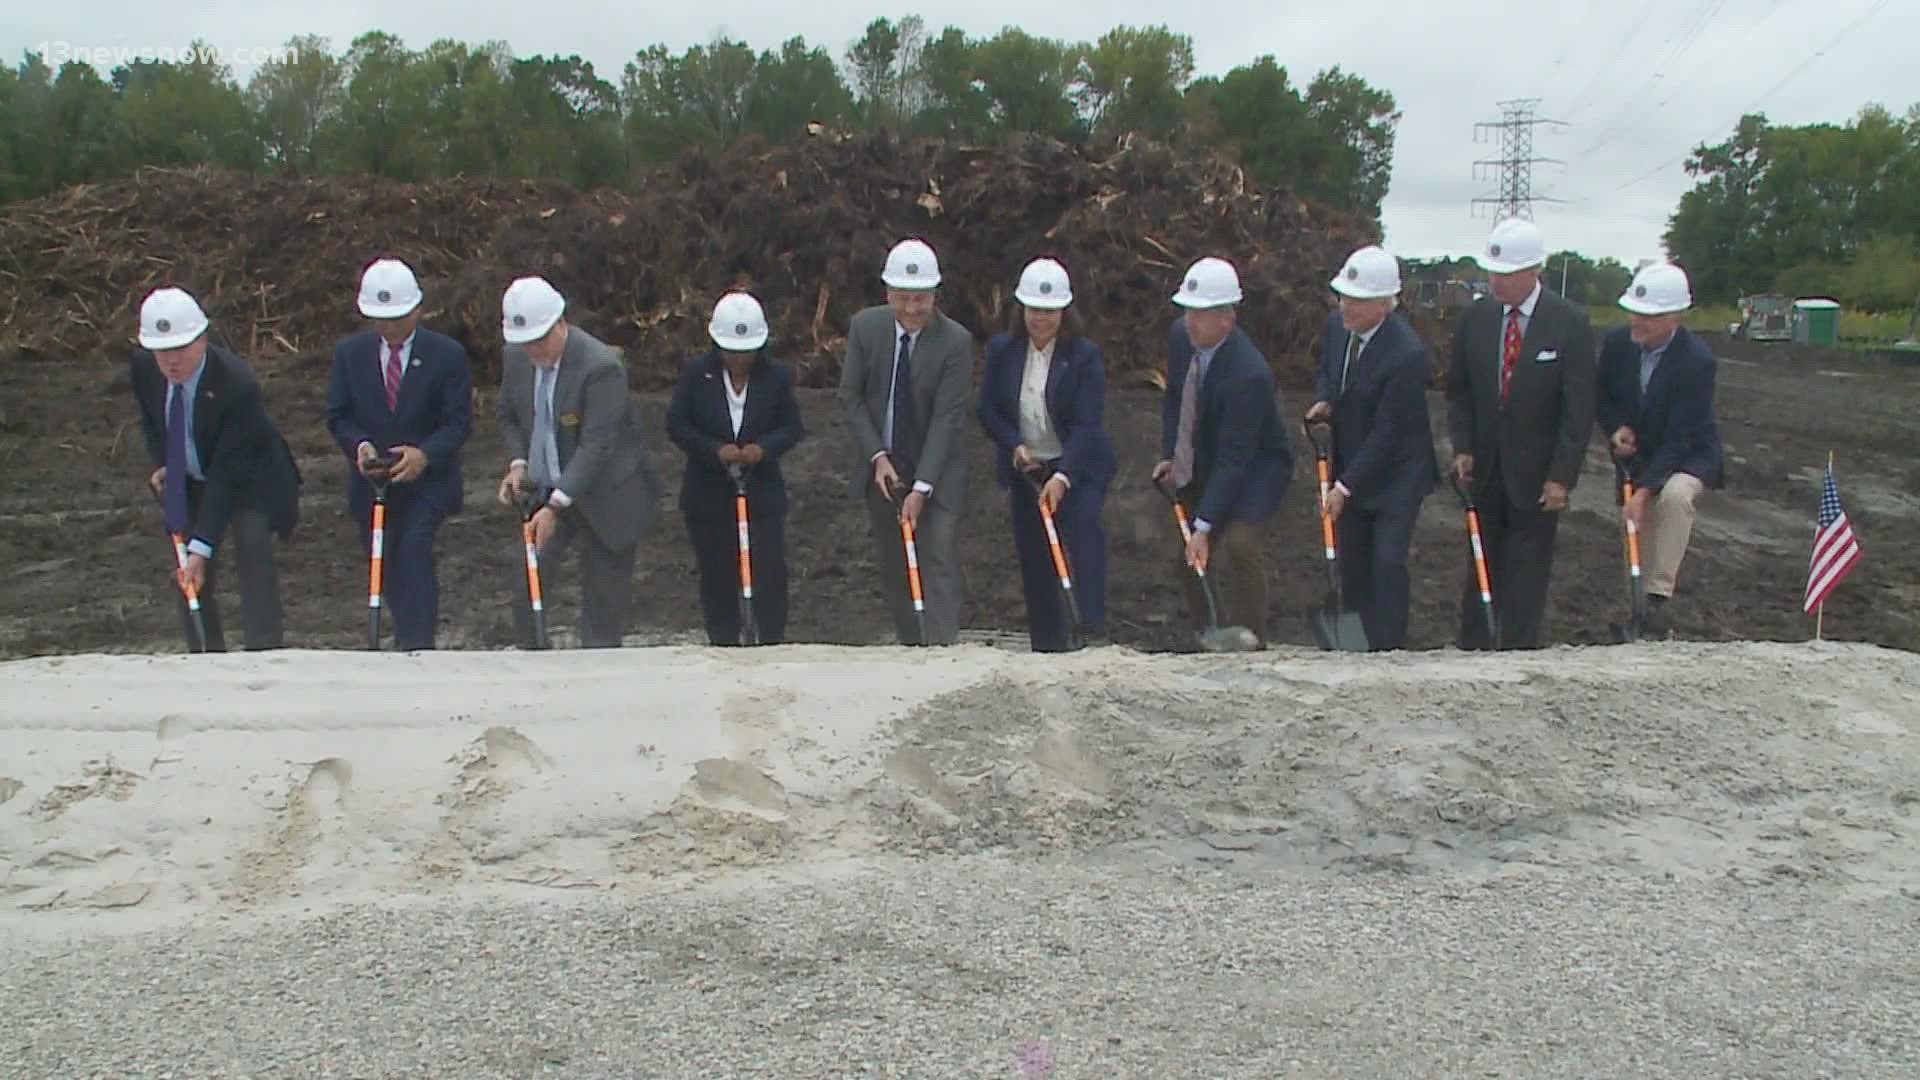 On Wednesday, ground was broken for the new Department of Veterans Affairs Chesapeake Healthcare center.